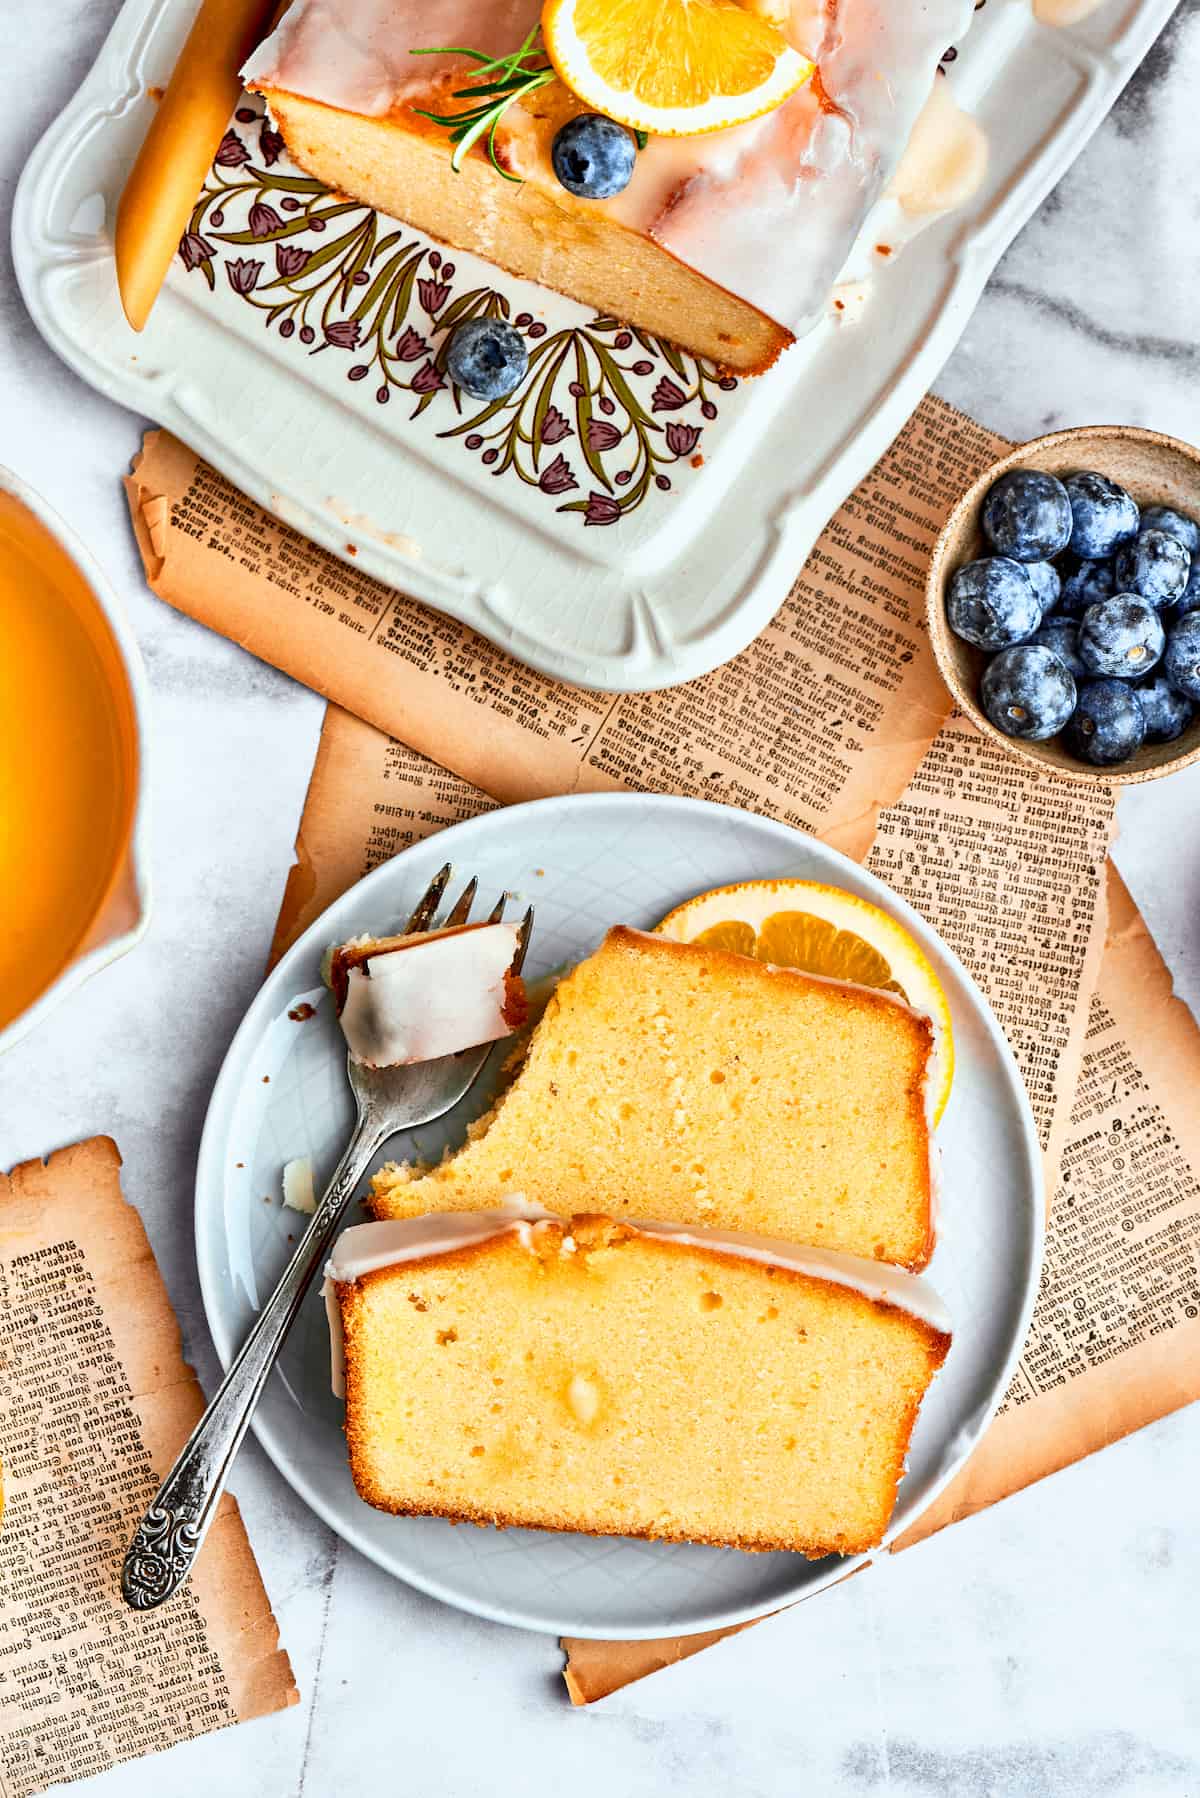 Slices of orange cake are arranged on a blue plate while a fork cuts into one of the pieces.